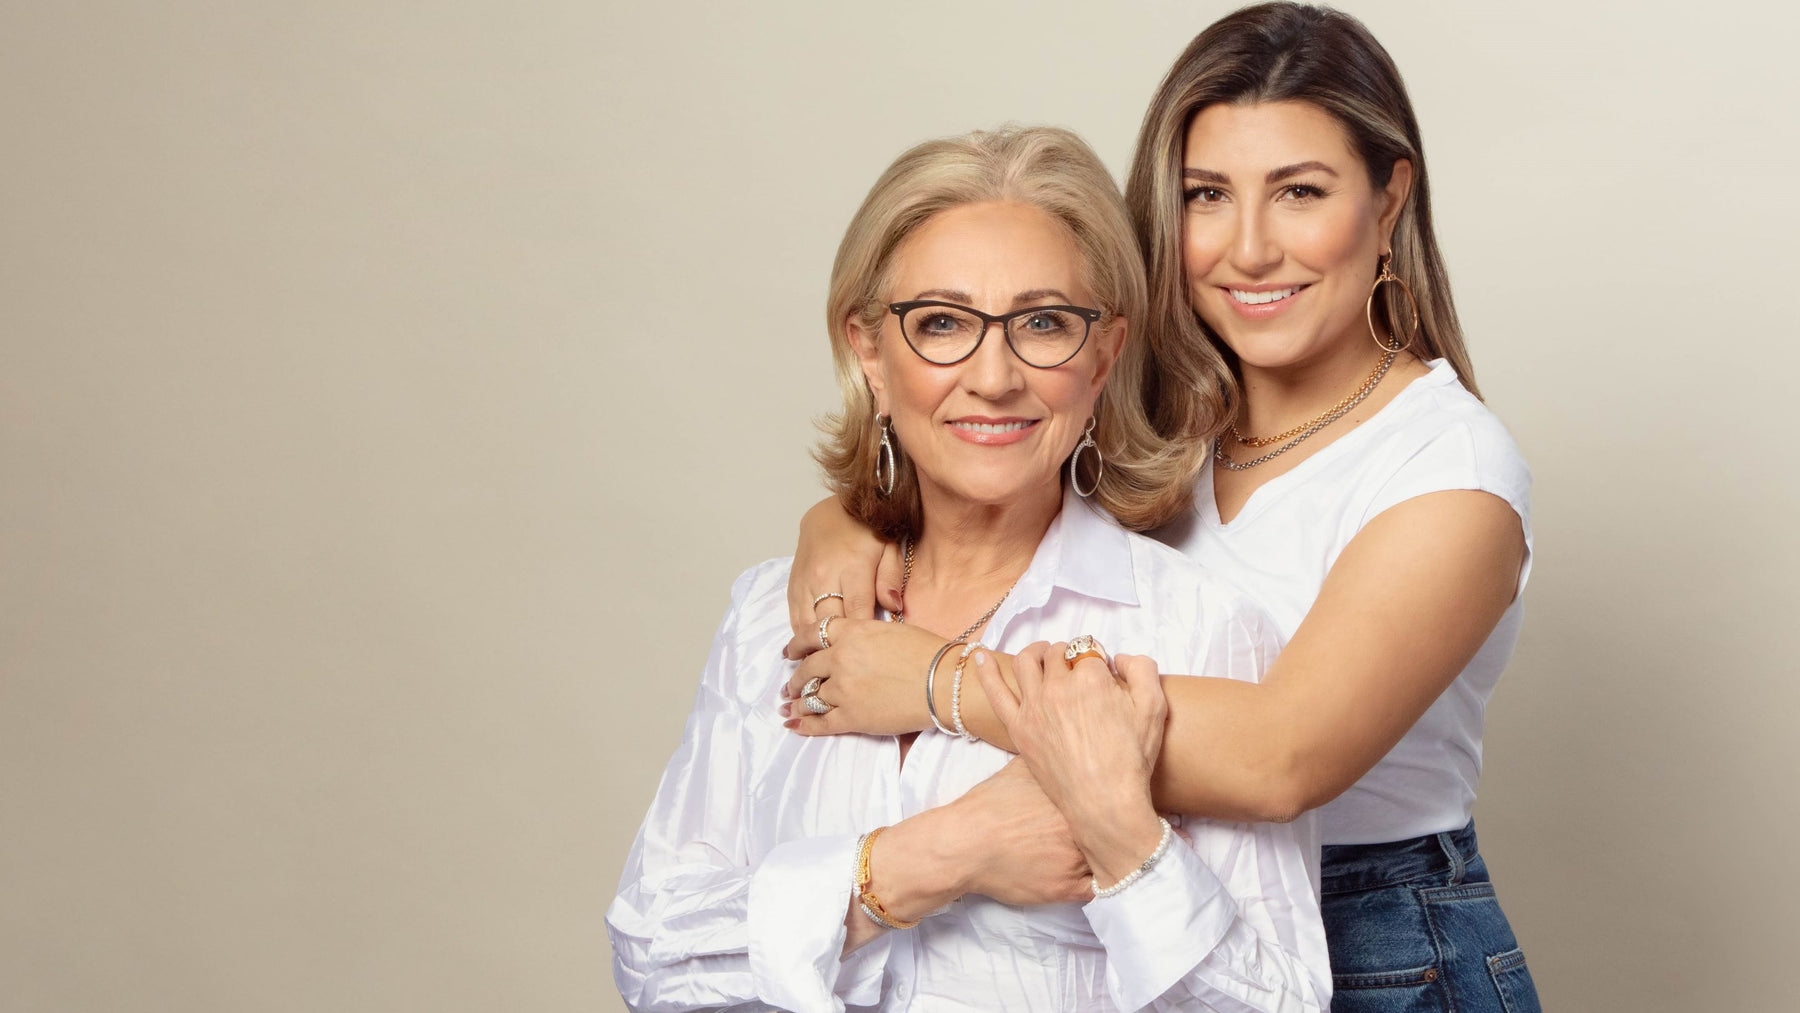 Mother daughter style - Ann King Lagos and her daughter Kate Lagos Sutera